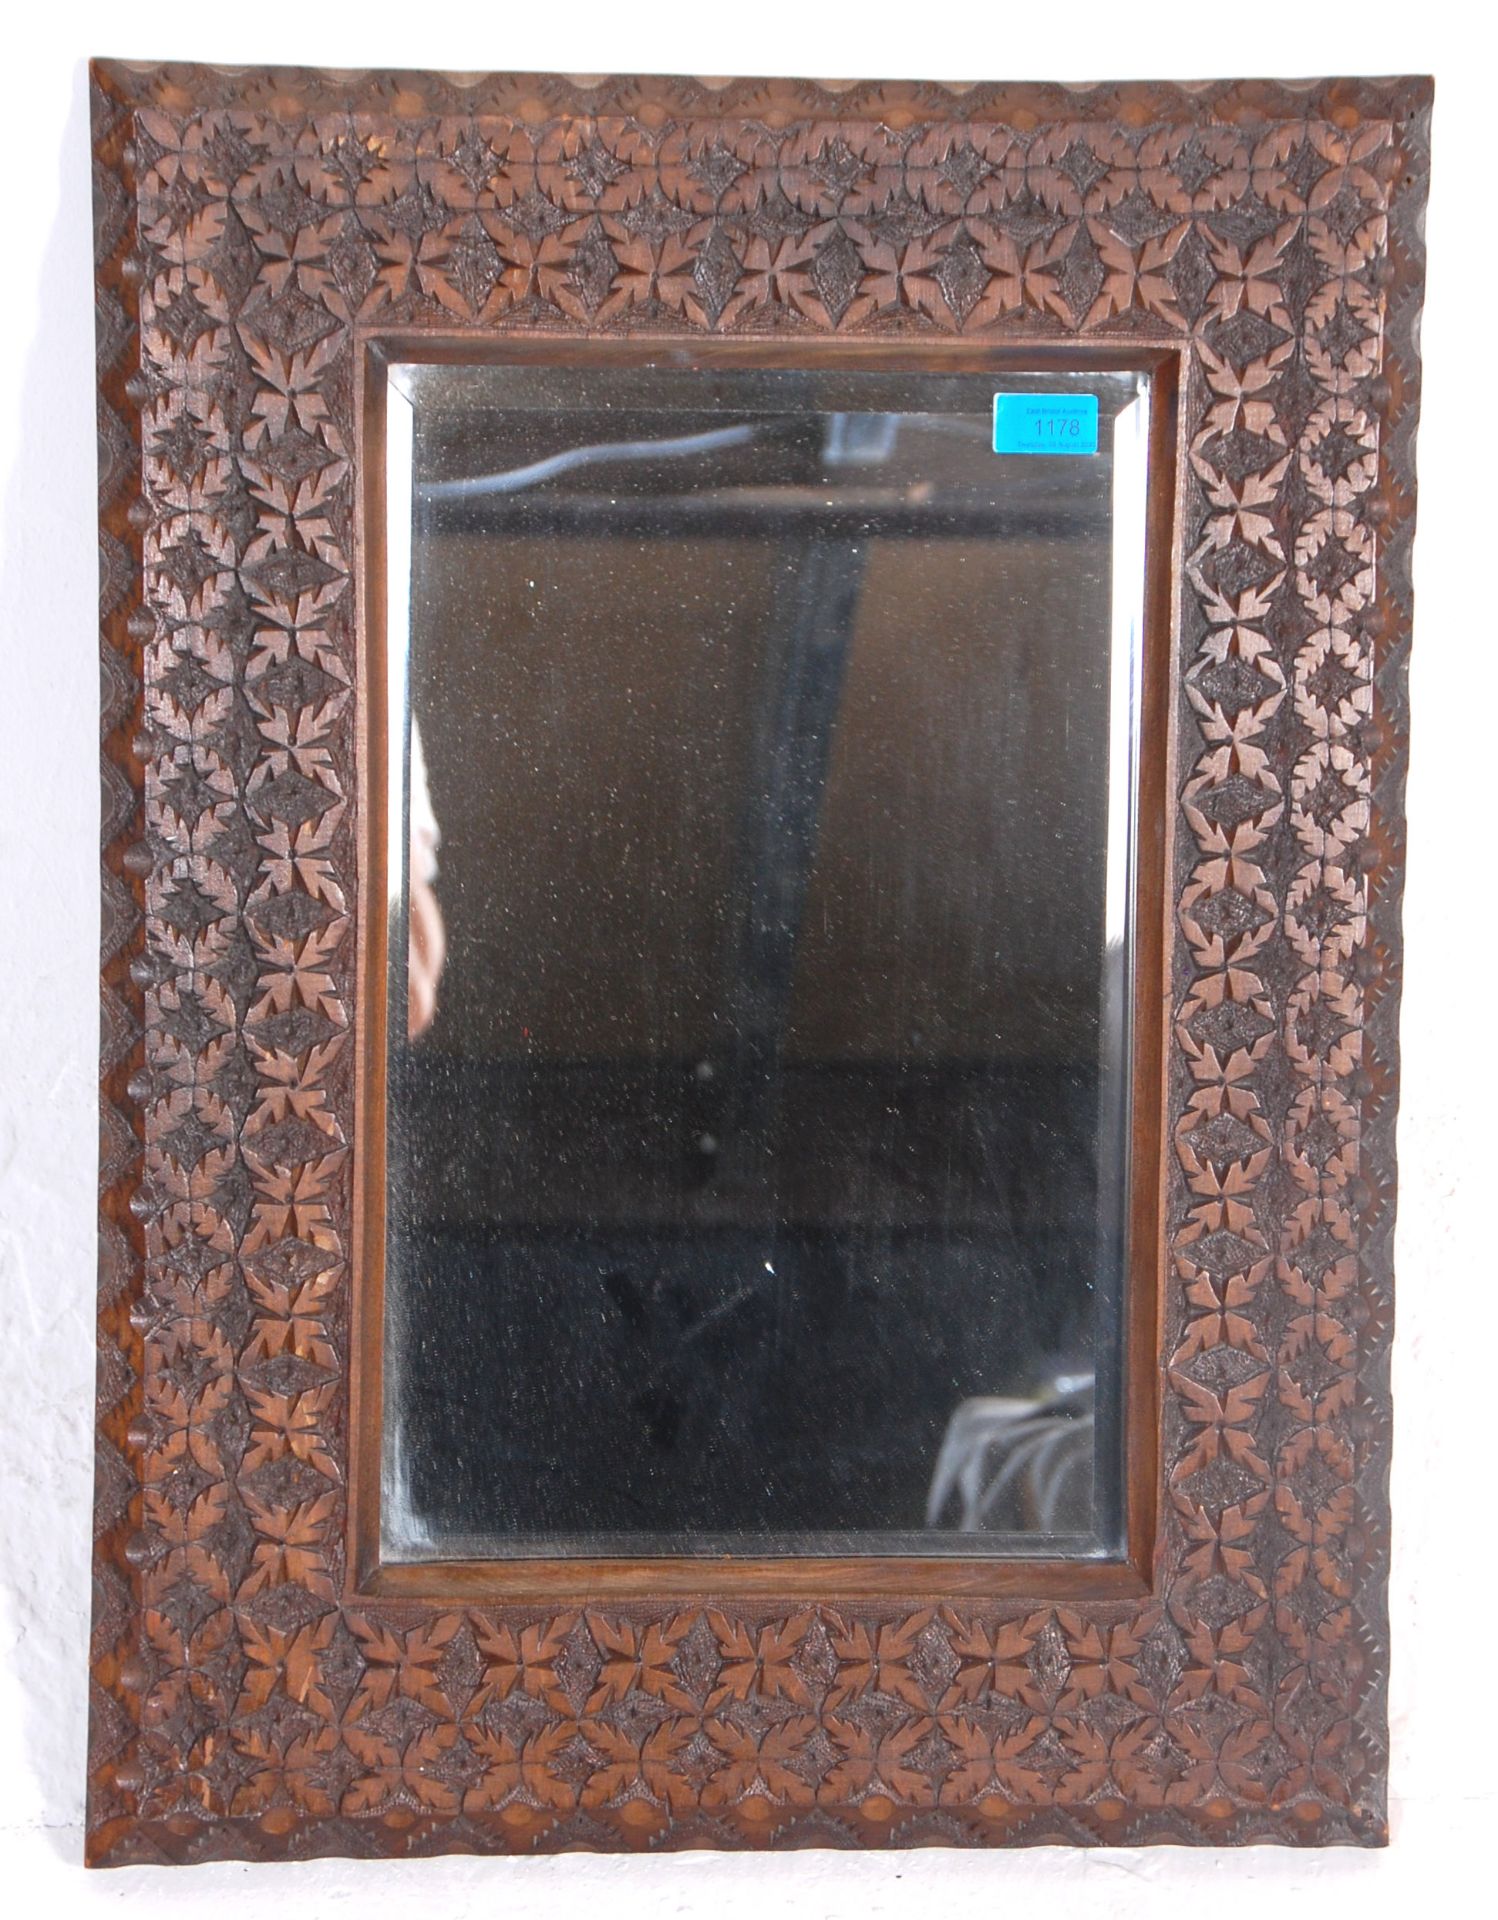 A 20th Century overmantel - wall mirror having a central glass mirror and bevelled edge inset to a